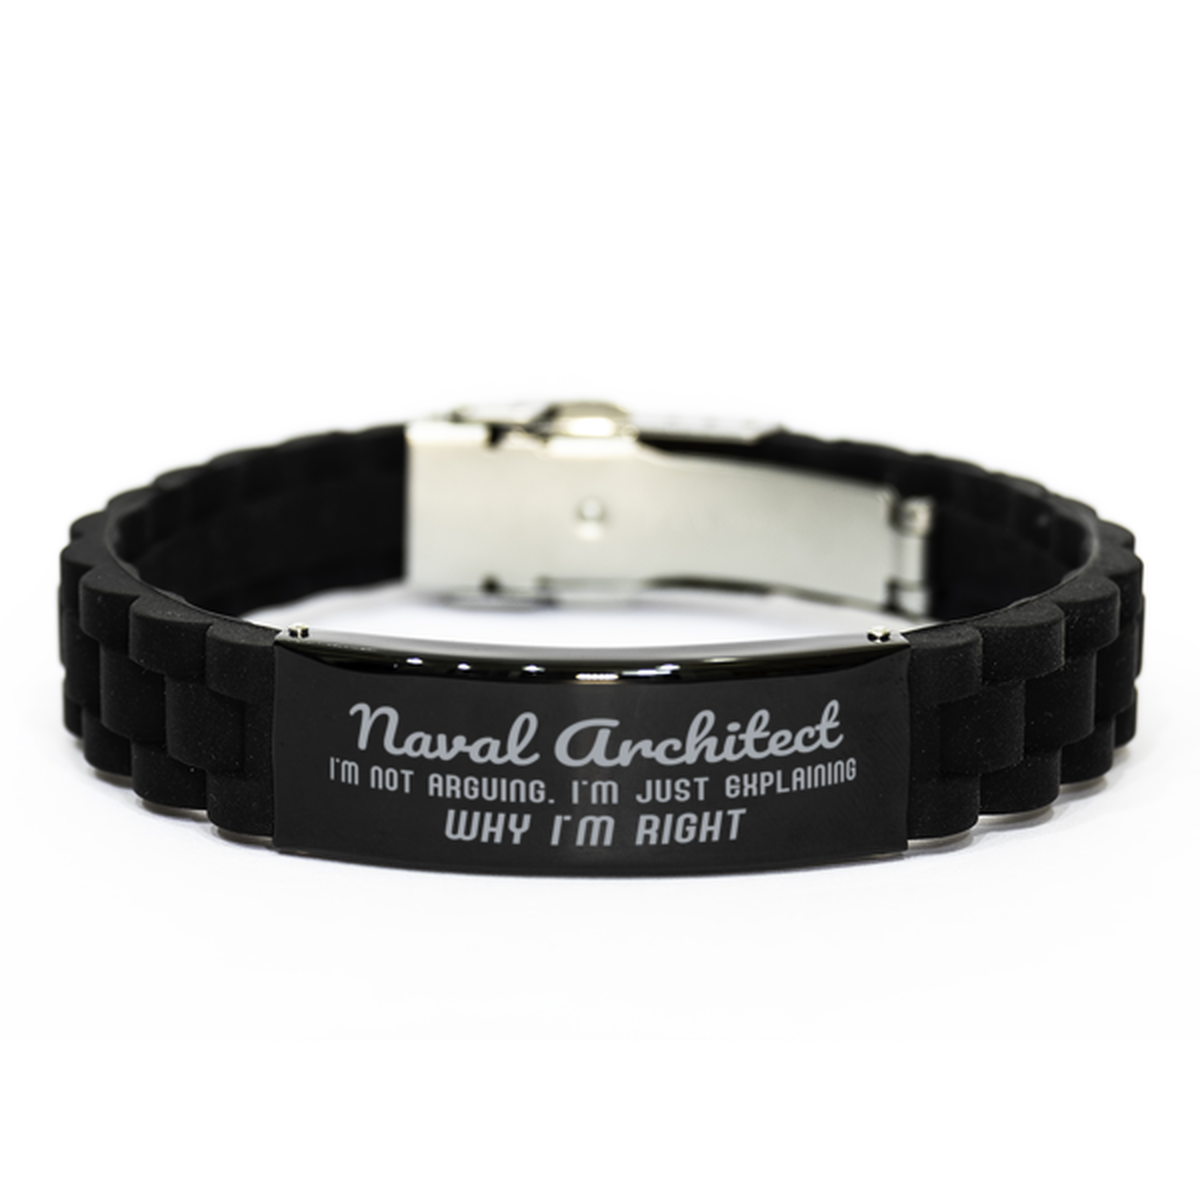 Naval Architect I'm not Arguing. I'm Just Explaining Why I'm RIGHT Black Glidelock Clasp Bracelet, Funny Saying Quote Naval Architect Gifts For Naval Architect Graduation Birthday Christmas Gifts for Men Women Coworker